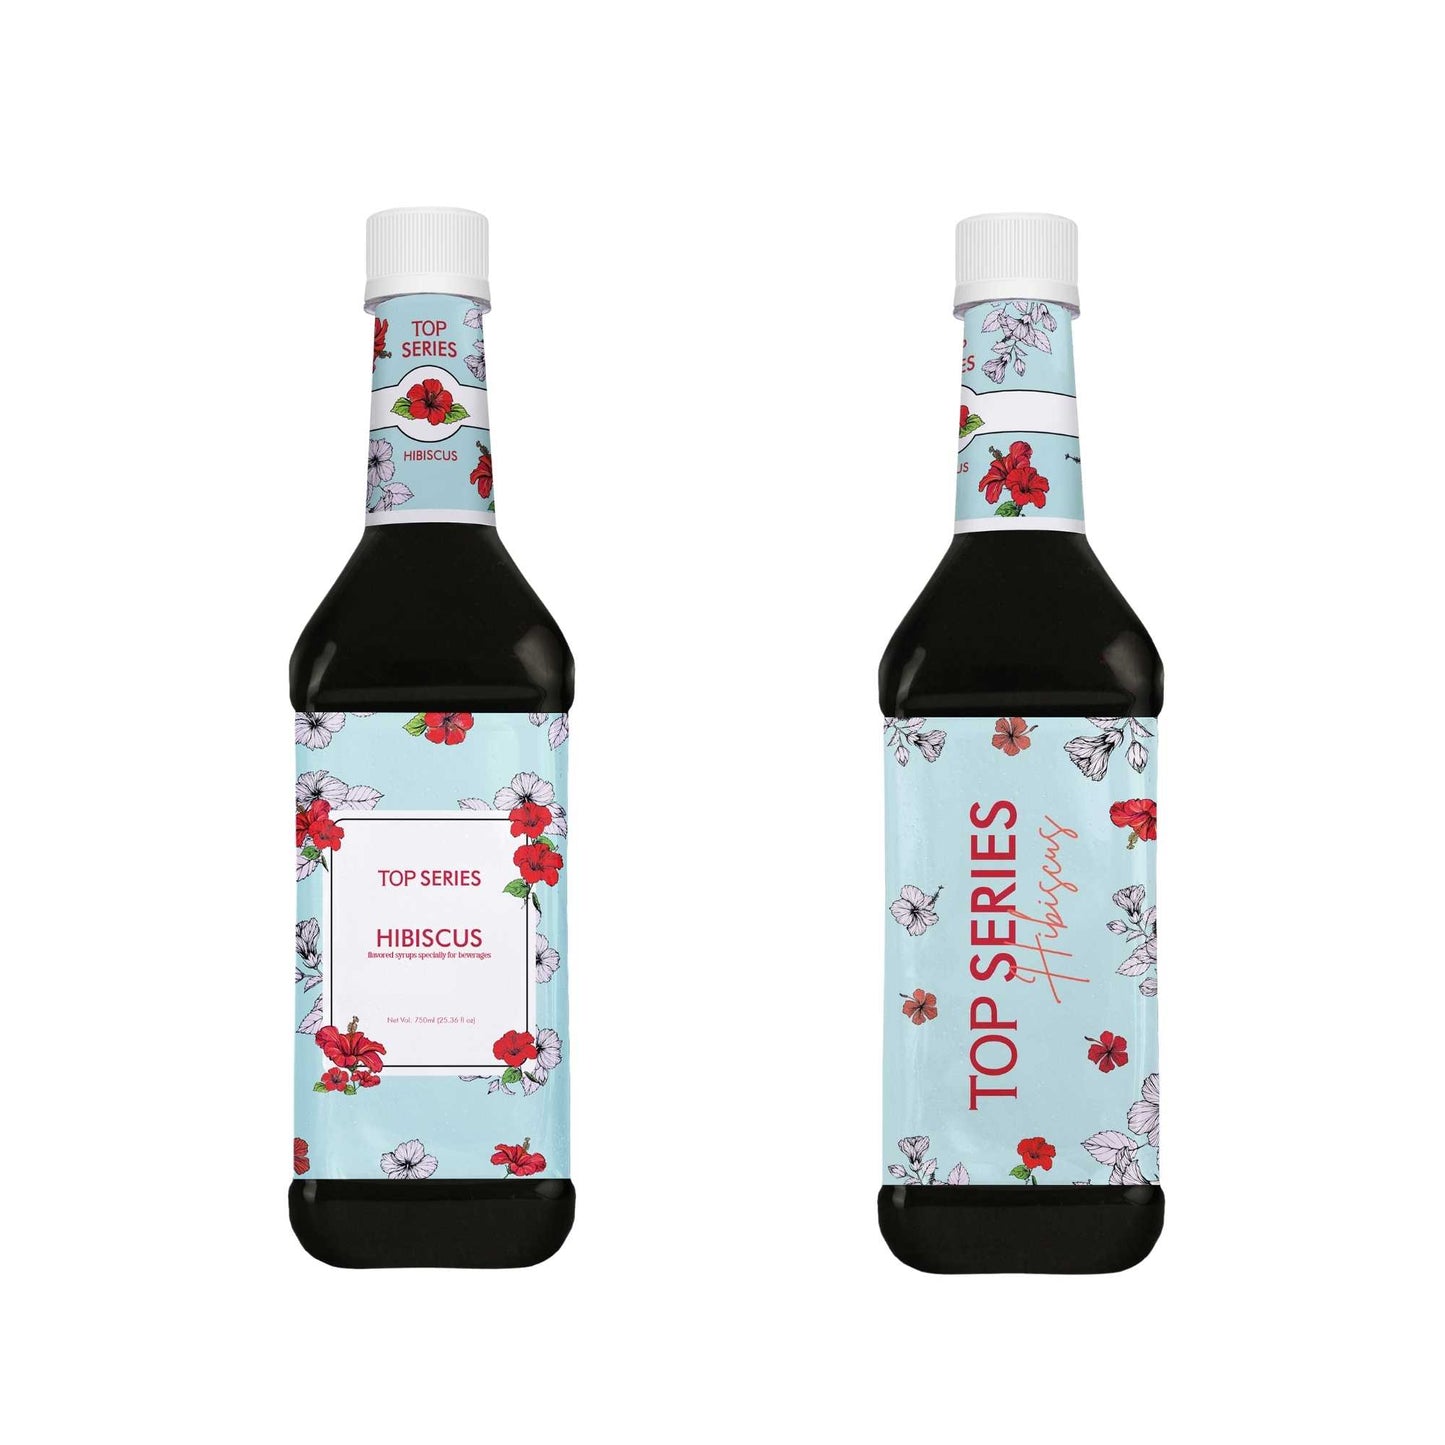 TOP Creamery Top Series Hibiscus Syrup 750ml